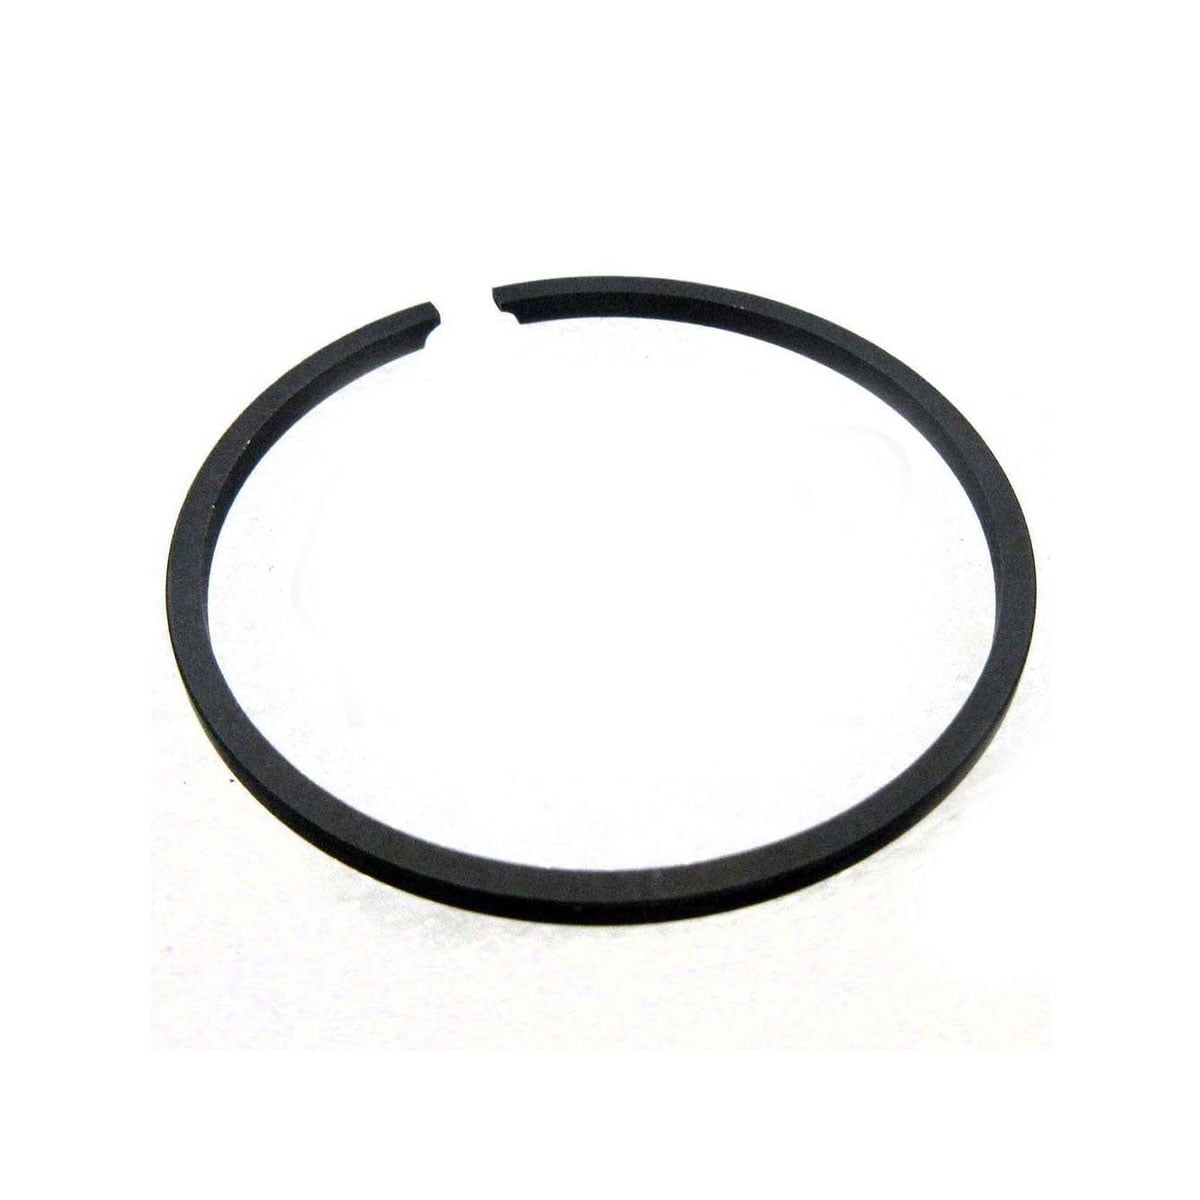 Husqvarna Piston Ring for Poulan Lawn Mowers, Gas Trimmers 